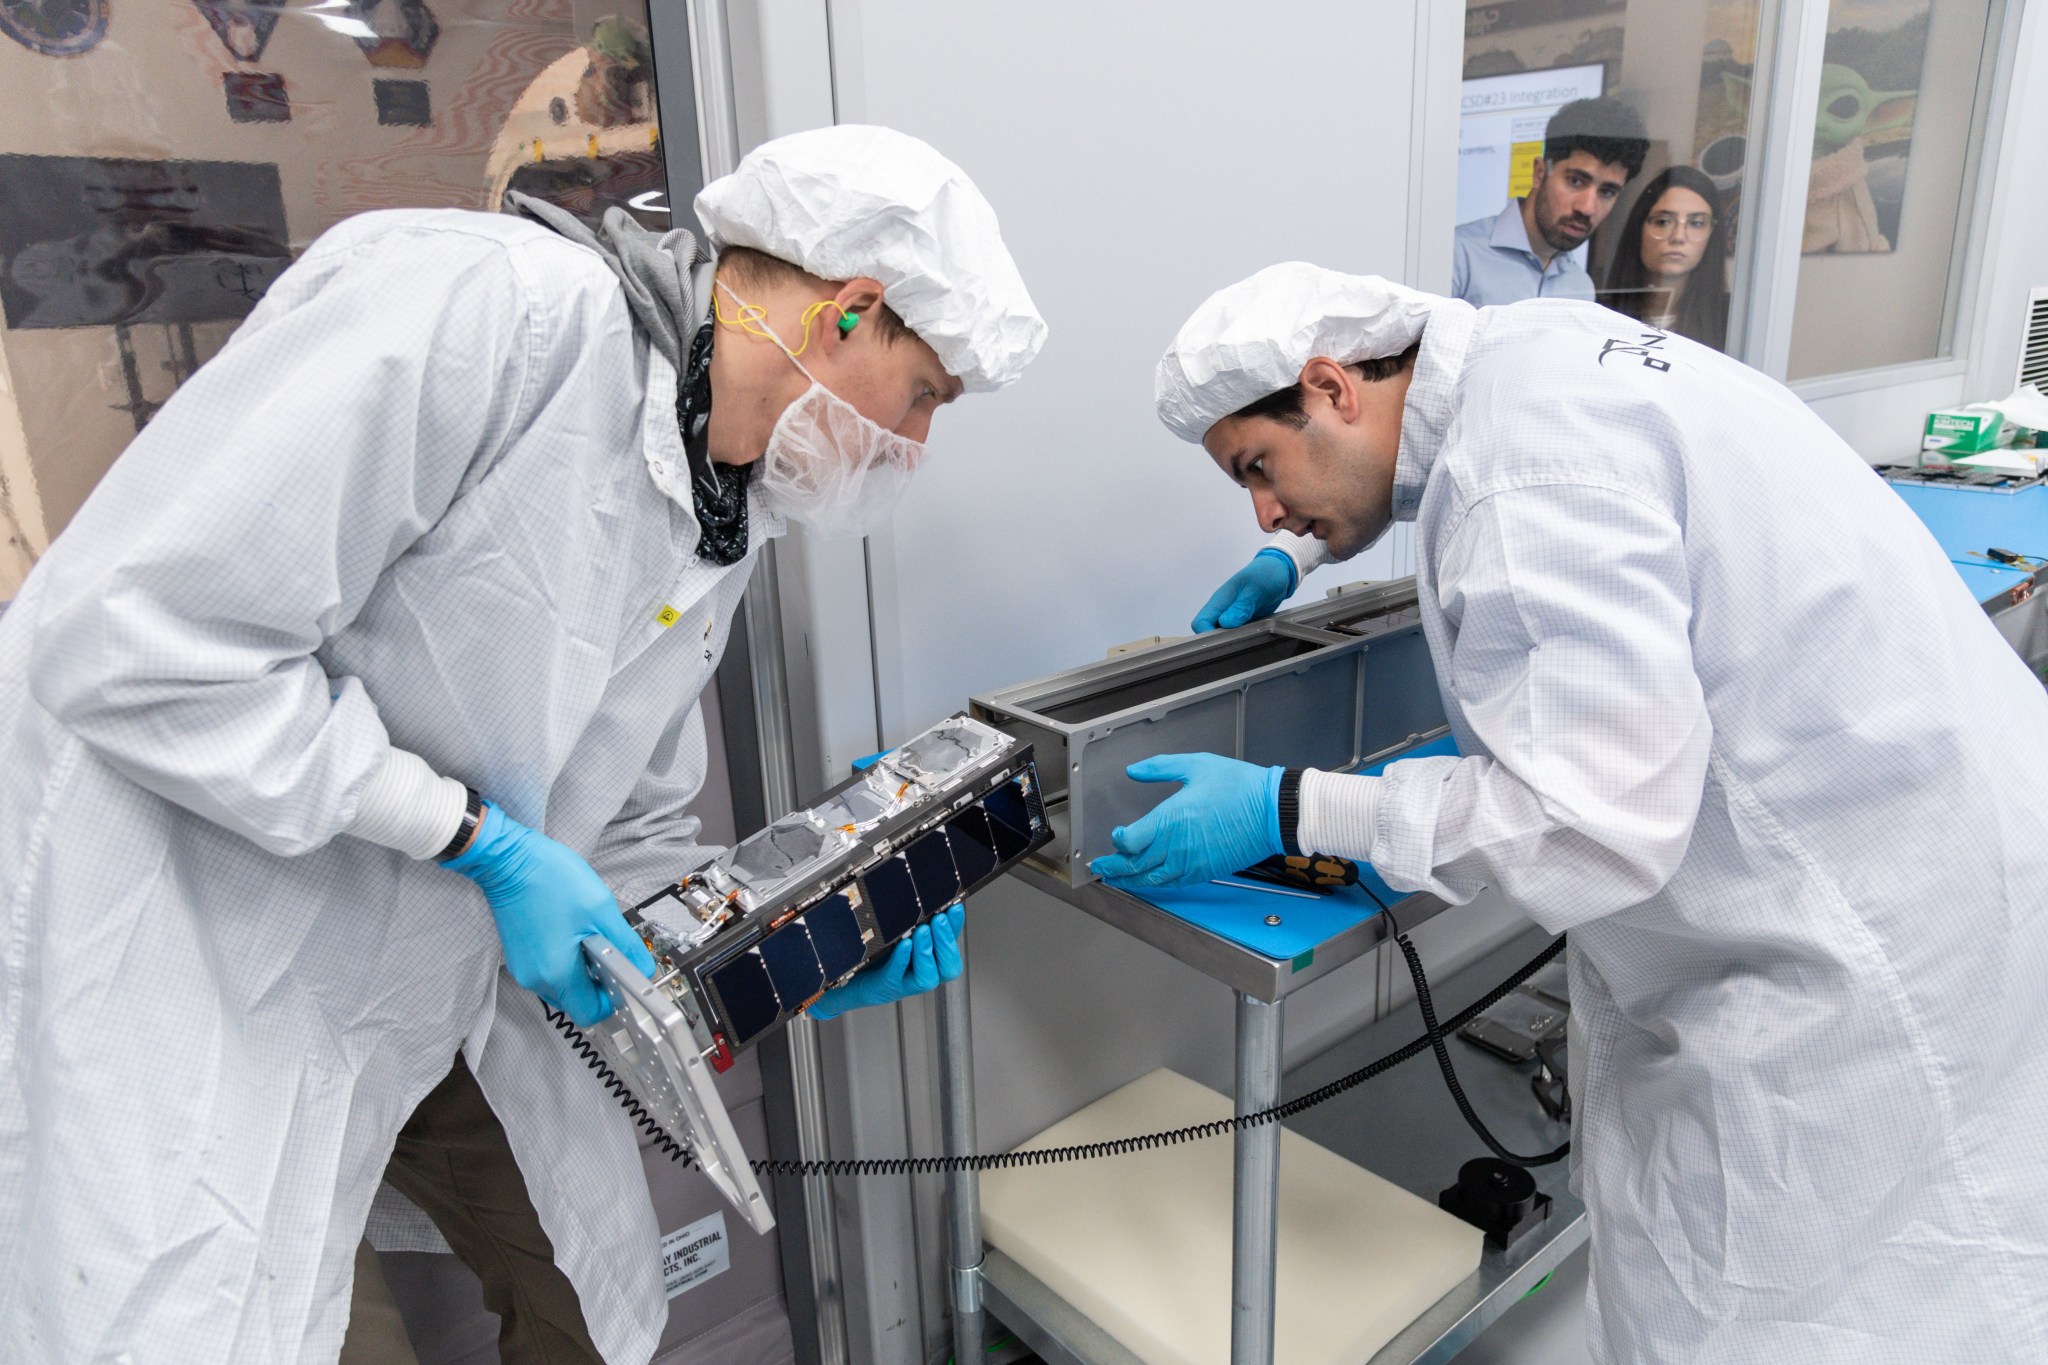 Two technicians wearing lab coats, gloves, and other cleanroom apparel insert a 10 centimeter by 30 centimeter (approximately 4 inch by 12 inch) device into a similarly-sized receptacle while being observed by two people through a window.